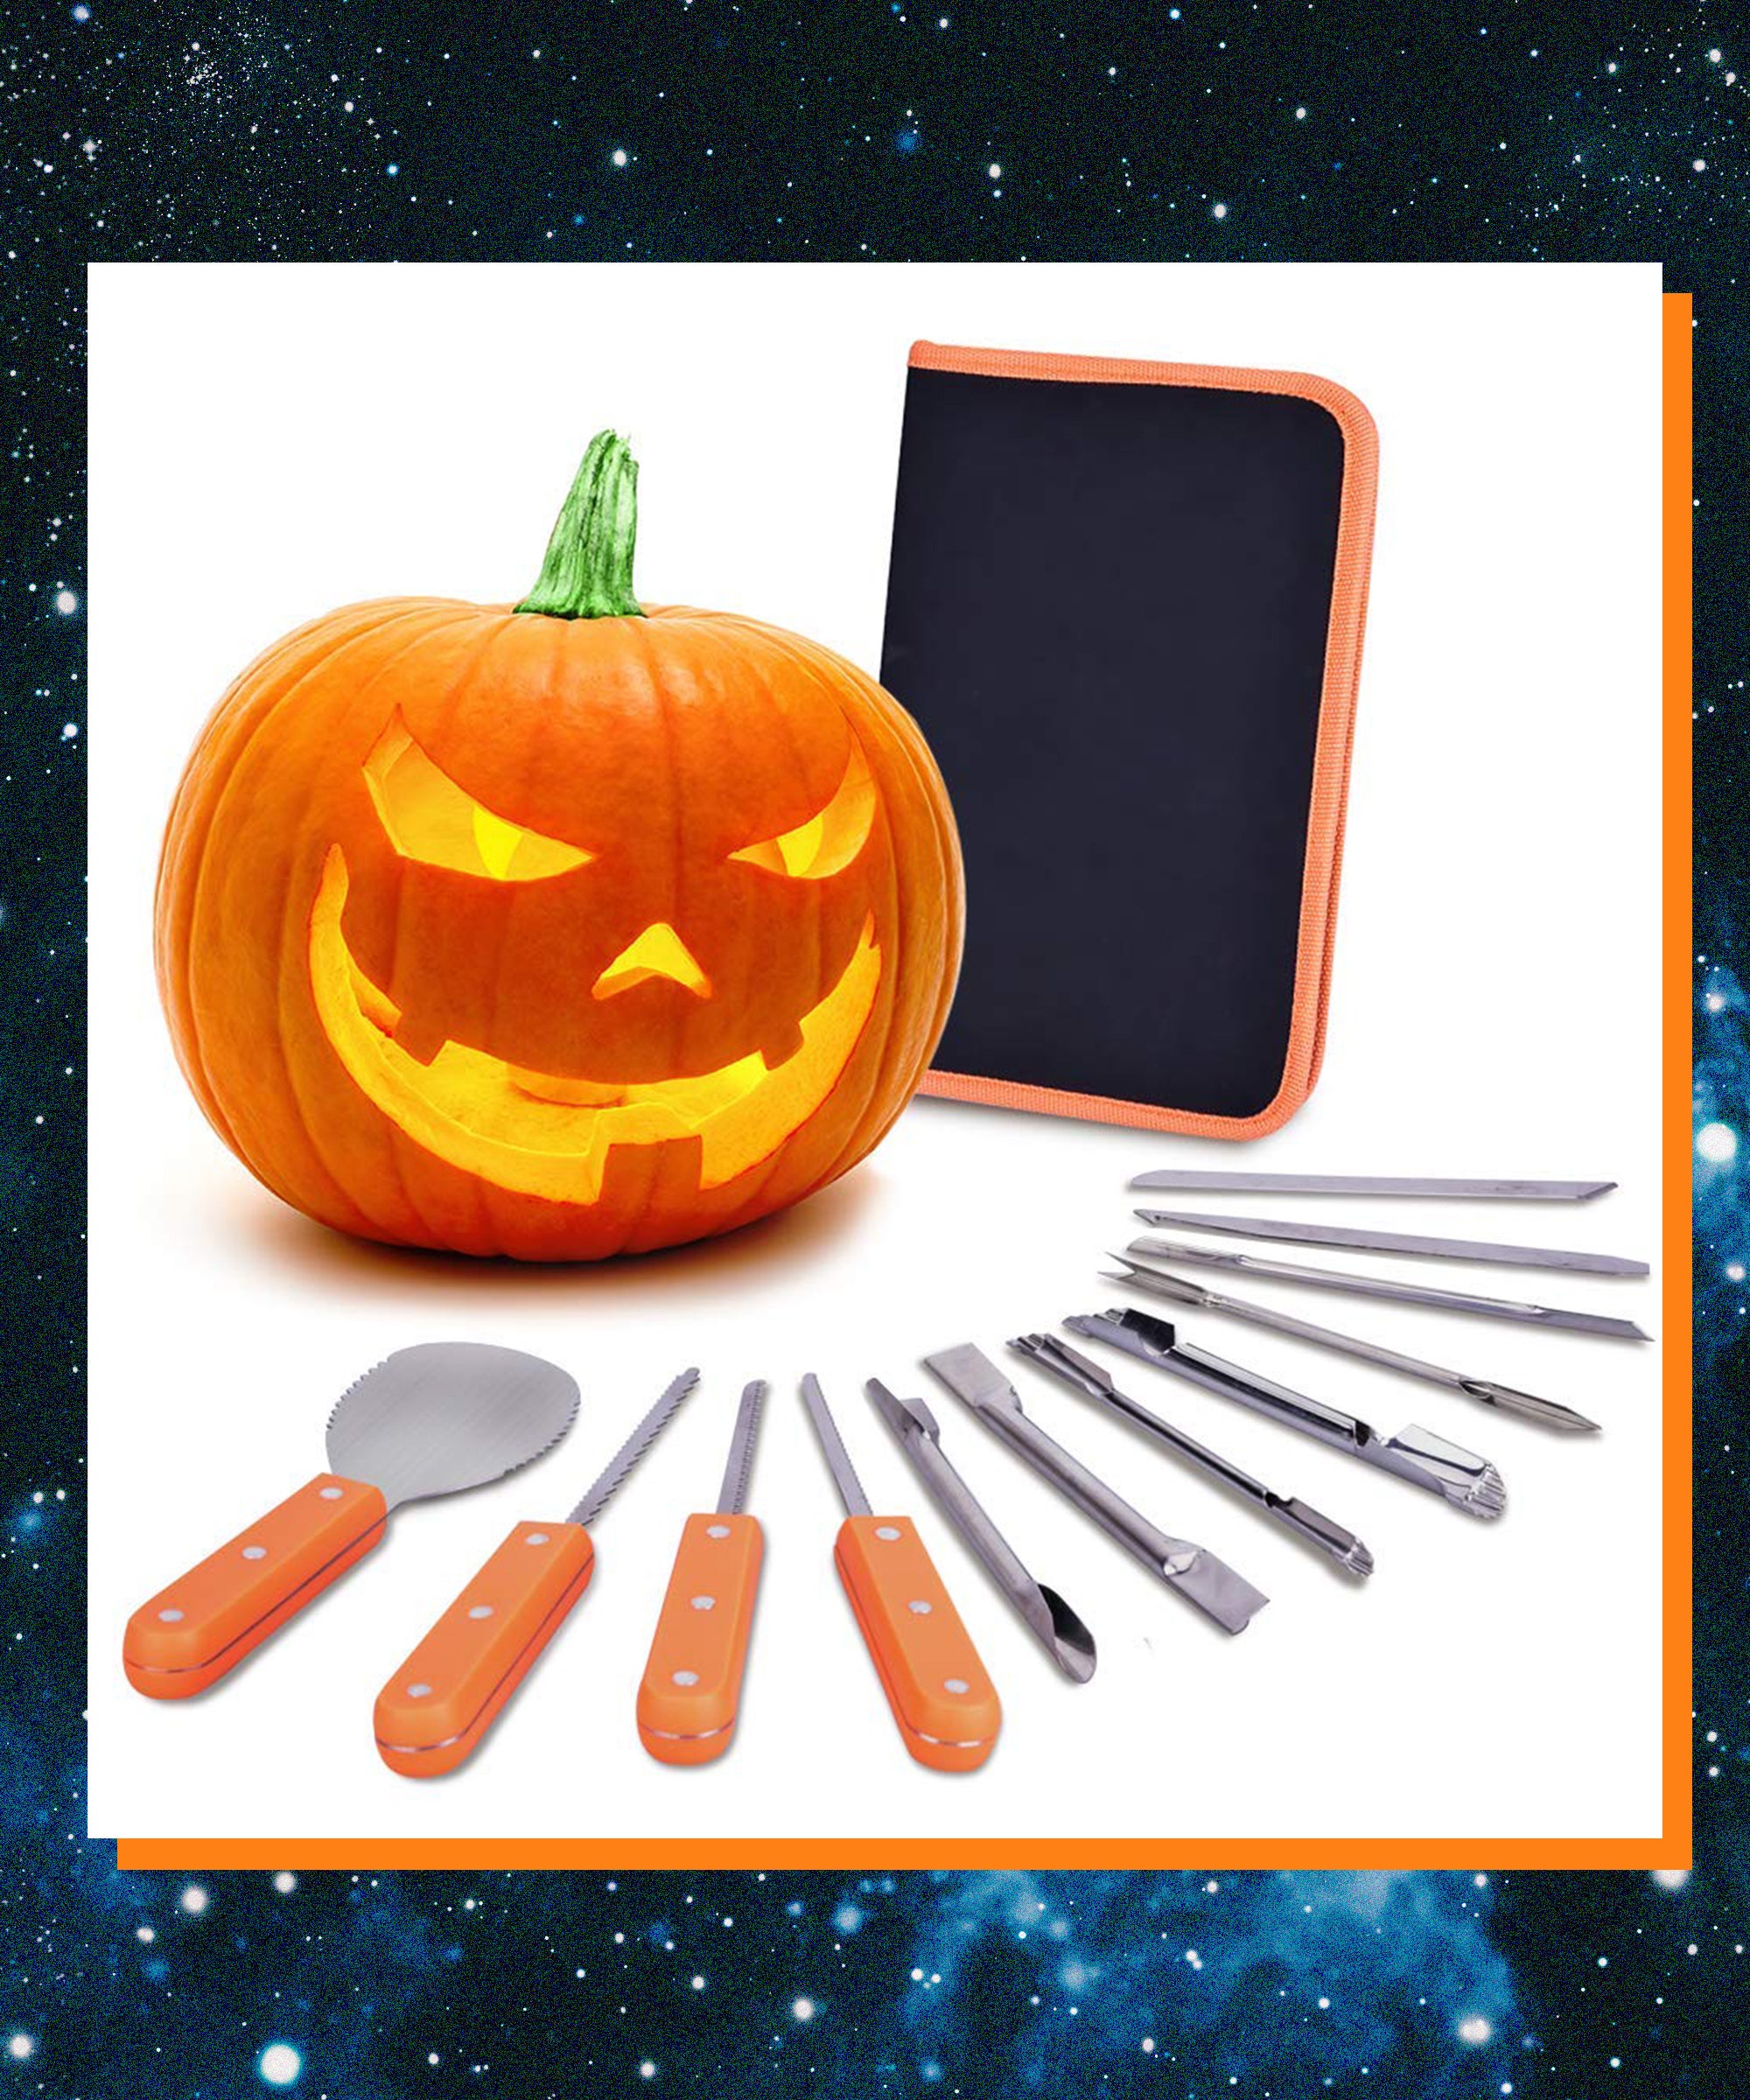 FEOAMO 11 Pieces Professional Heavy Duty Stainless Steel Jack O Lanterns Pumpkin Carving Tools Set for Halloween Kids Adults Party Decorations Halloween Pumpkin Carving Kit with Storage Carrying Bag